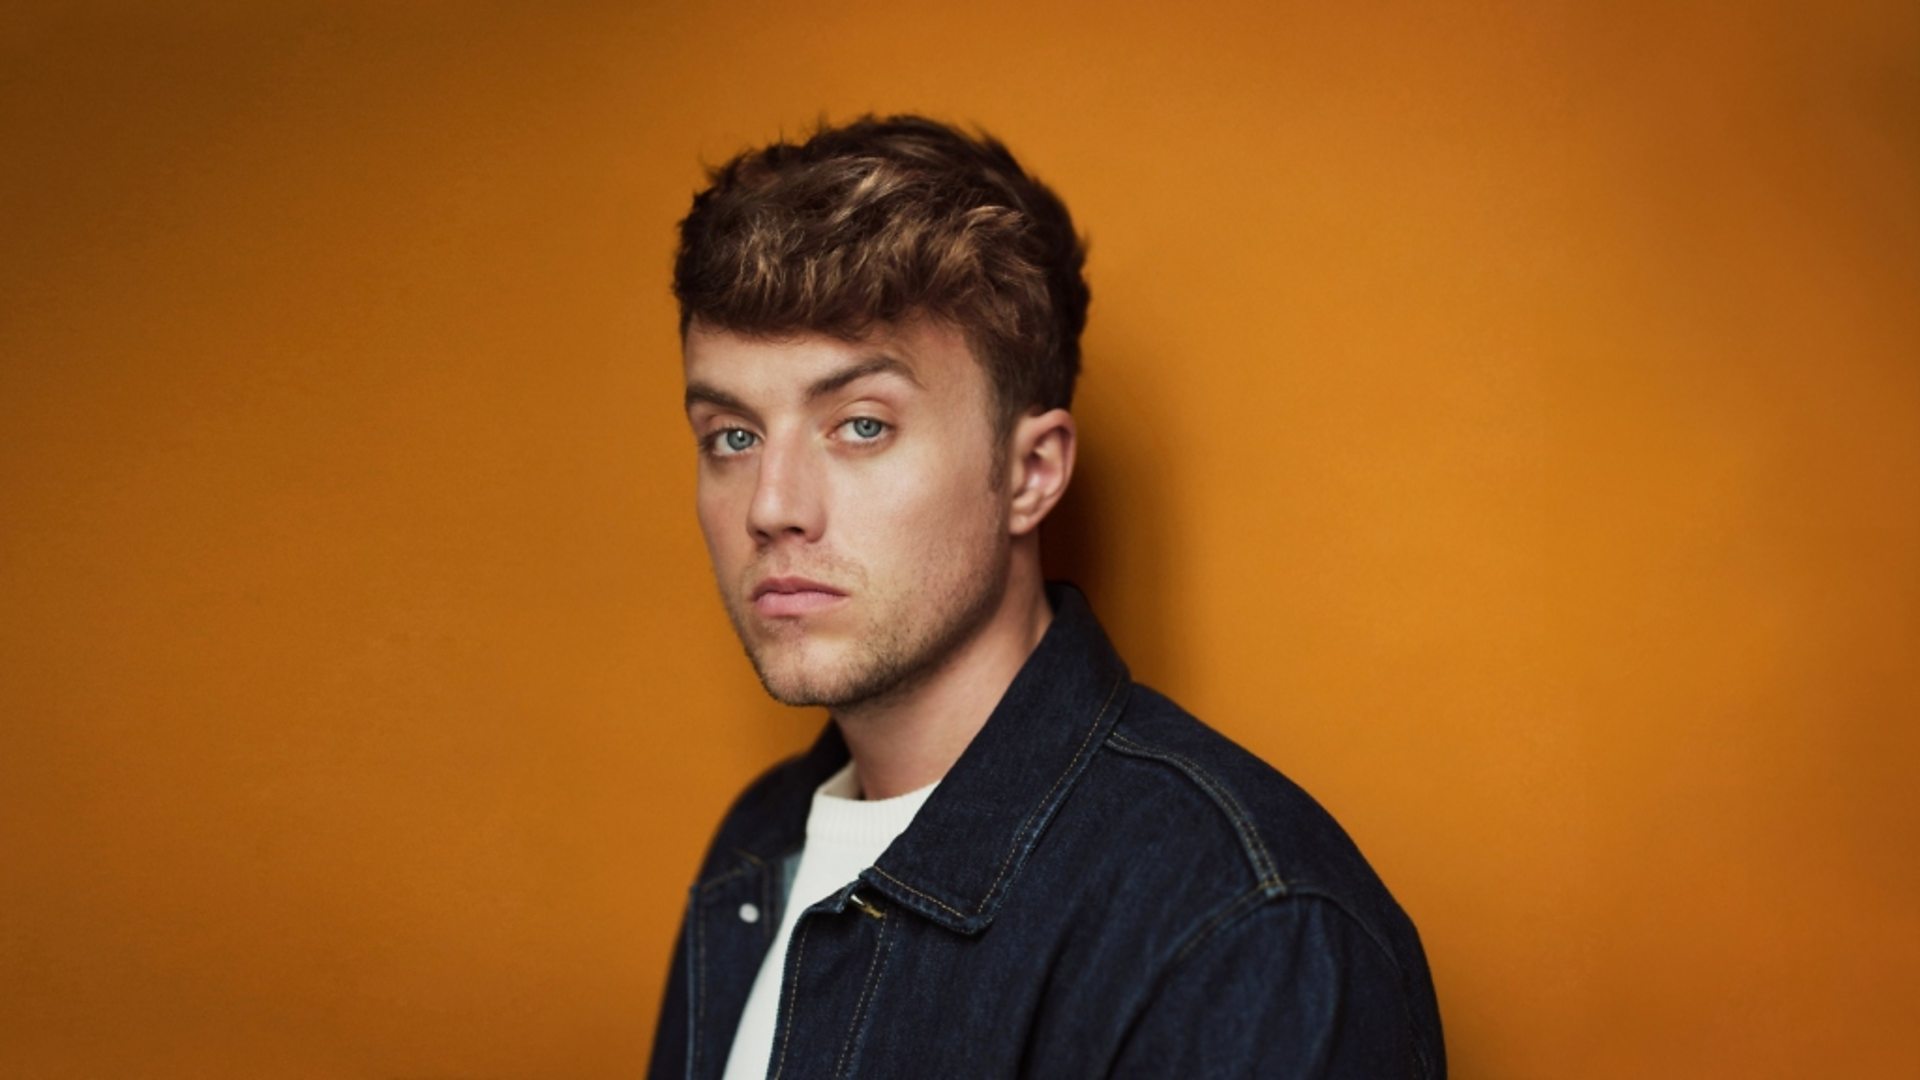 Interview with Roman Kemp on his new BBC mental health documentary